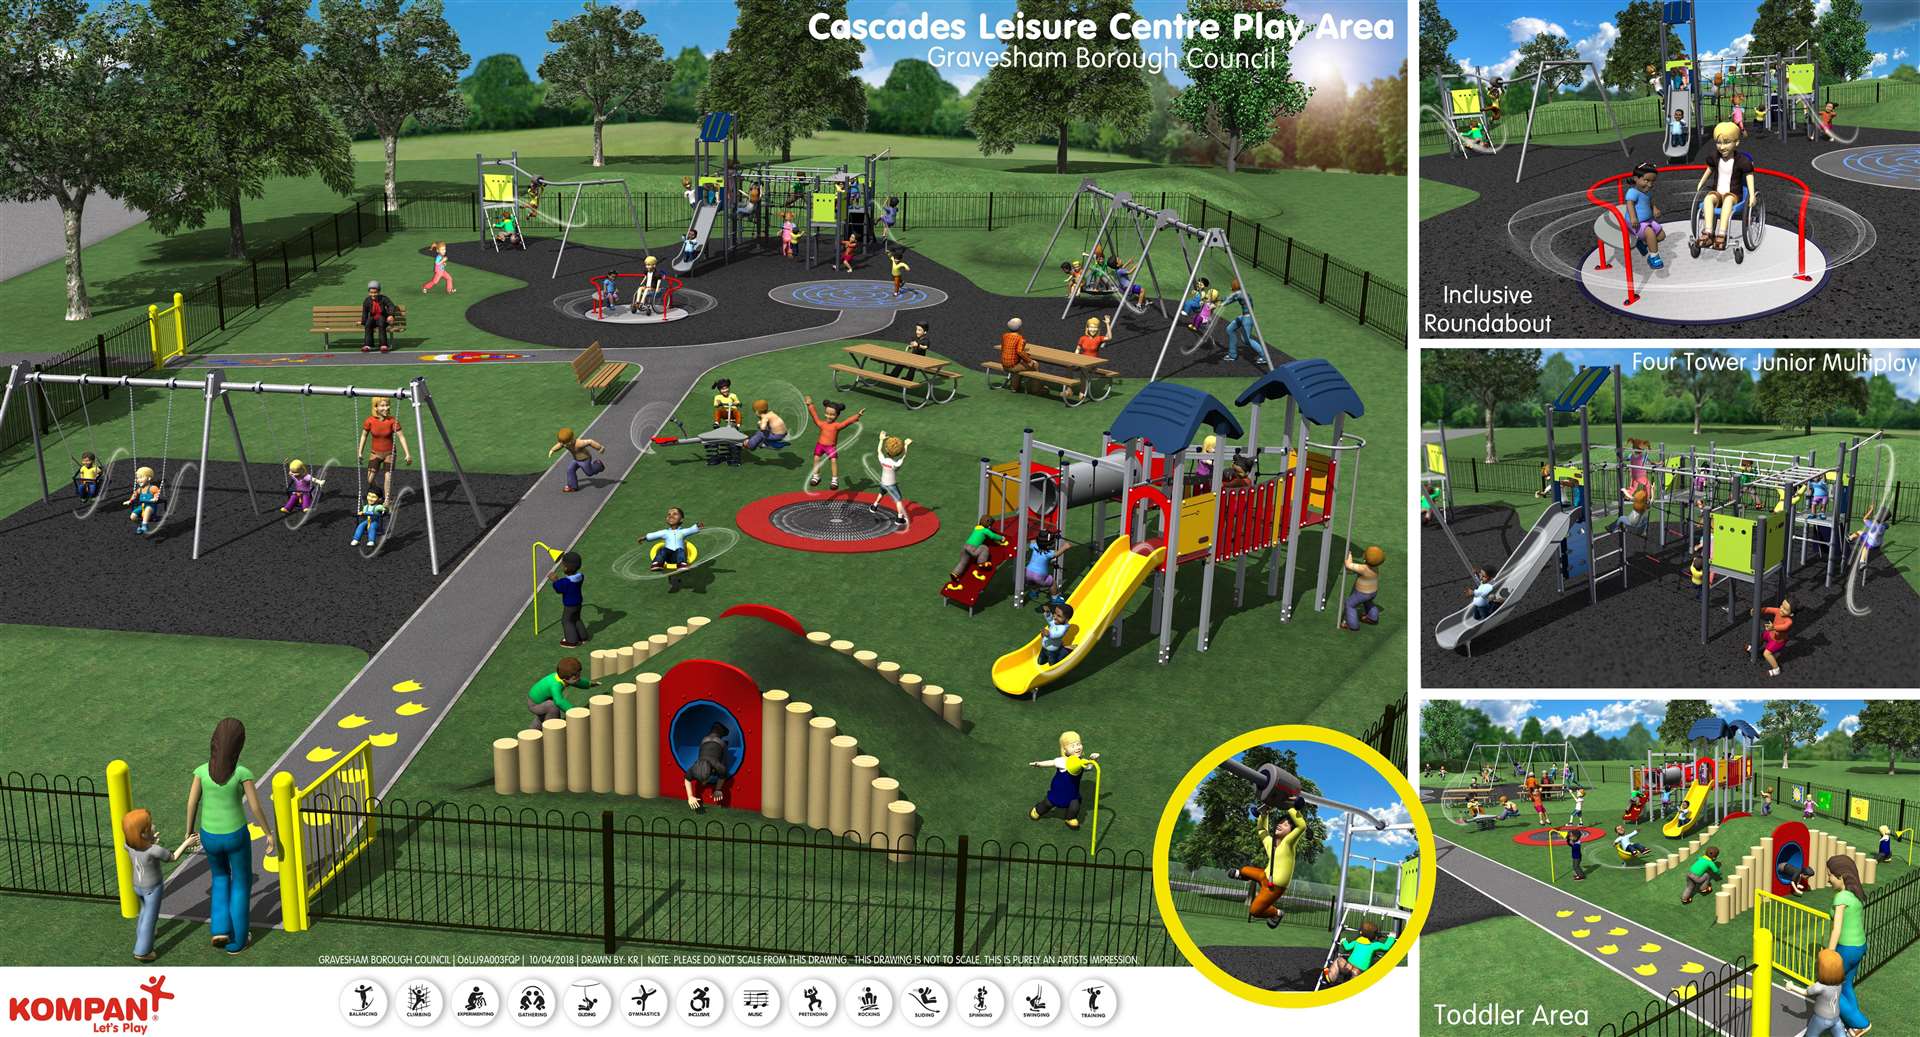 An artistic impression of the new play area at Cascades Leisure Centre, Gravesend